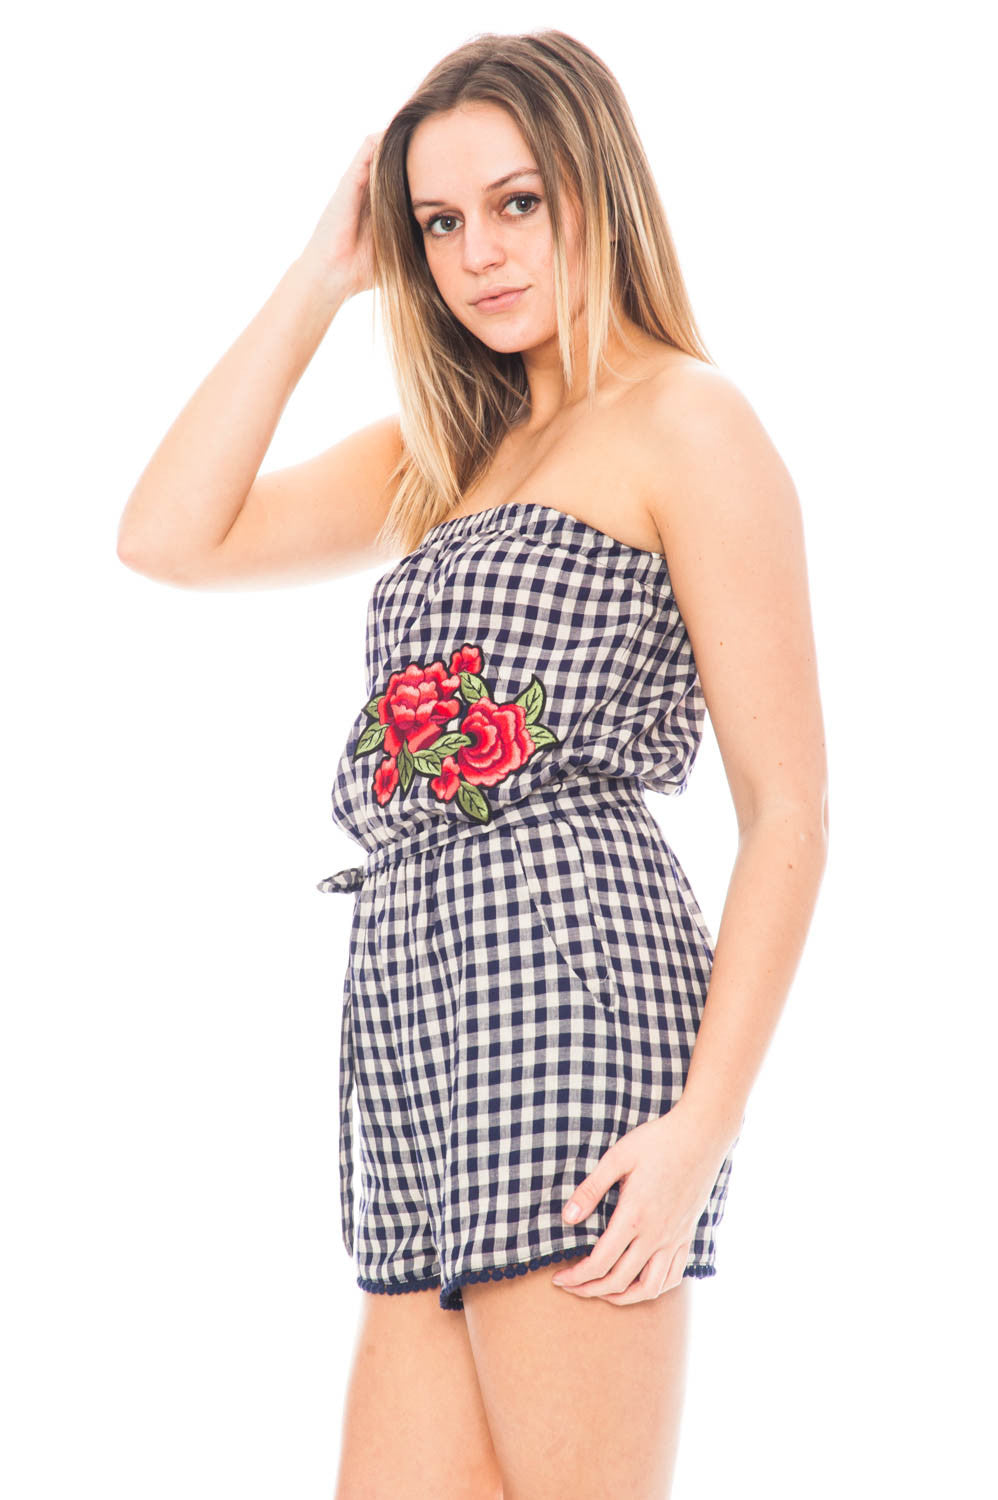 Romper - Gingham Strapless Romper with Floral Patch by Everly